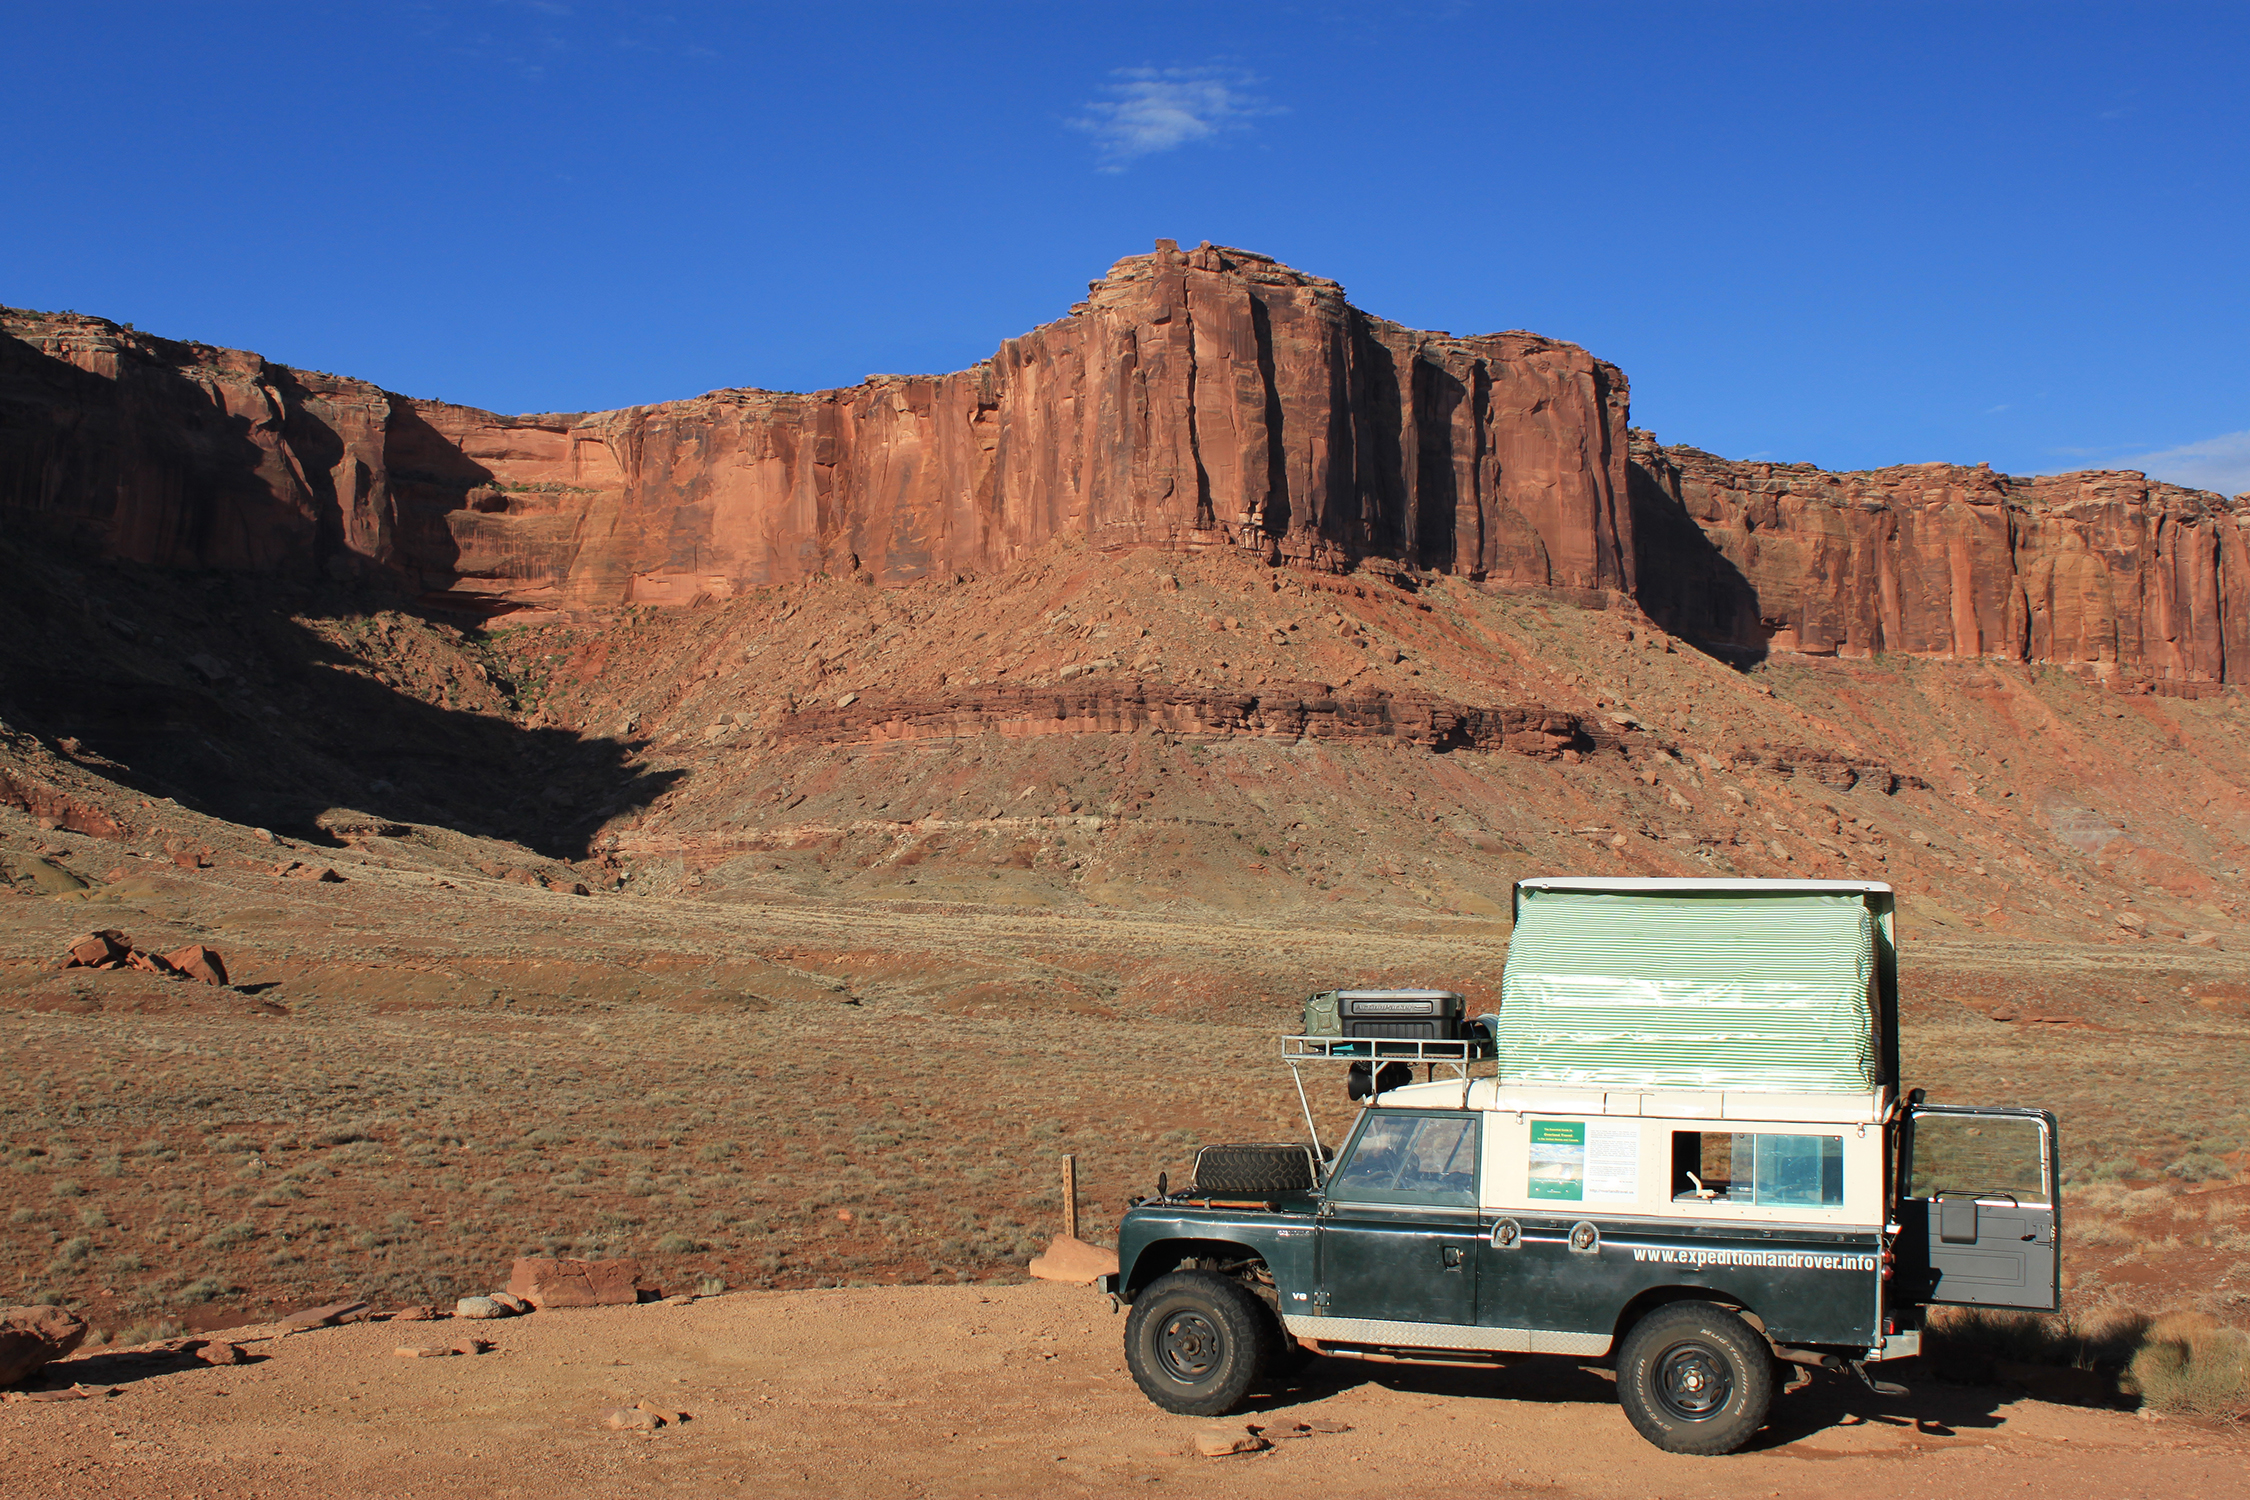 Land Rover Dormobile camped in Canyonlands National Park